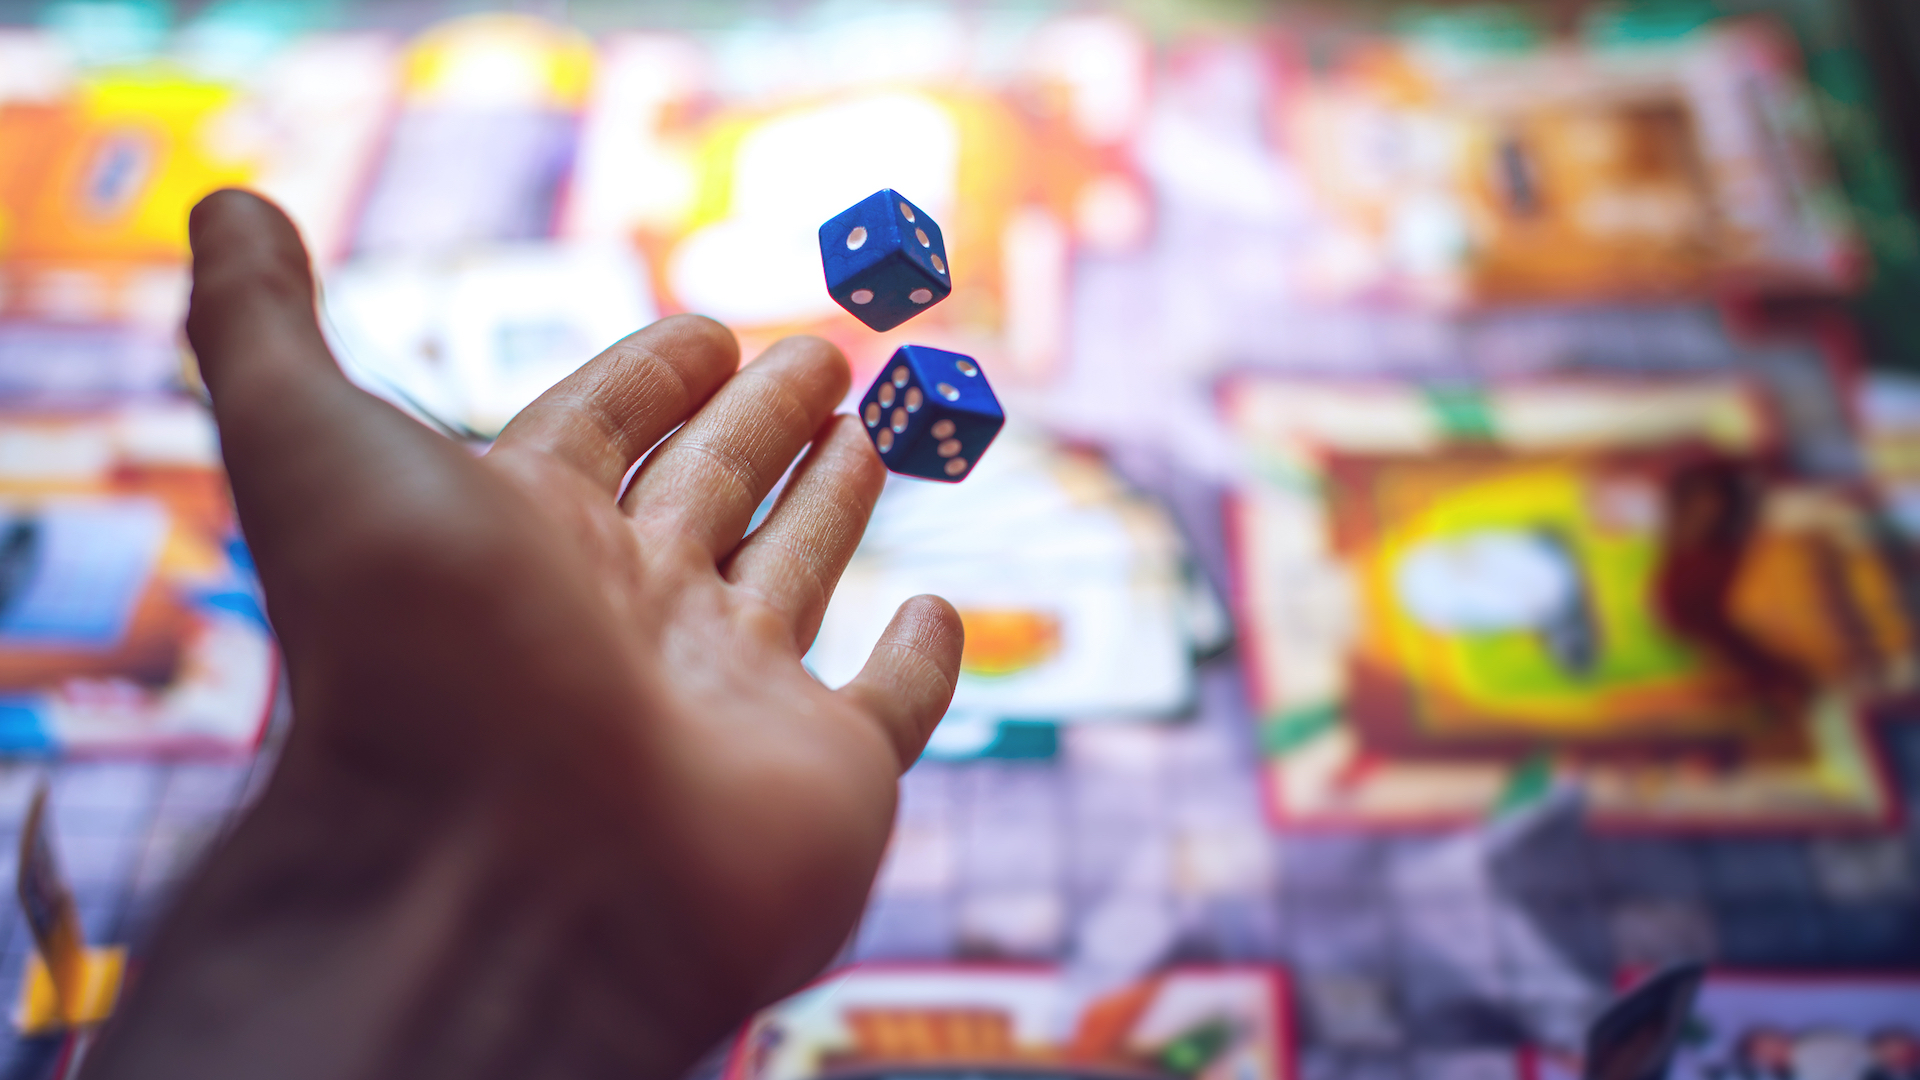 A person rolling the dice while playing a board game